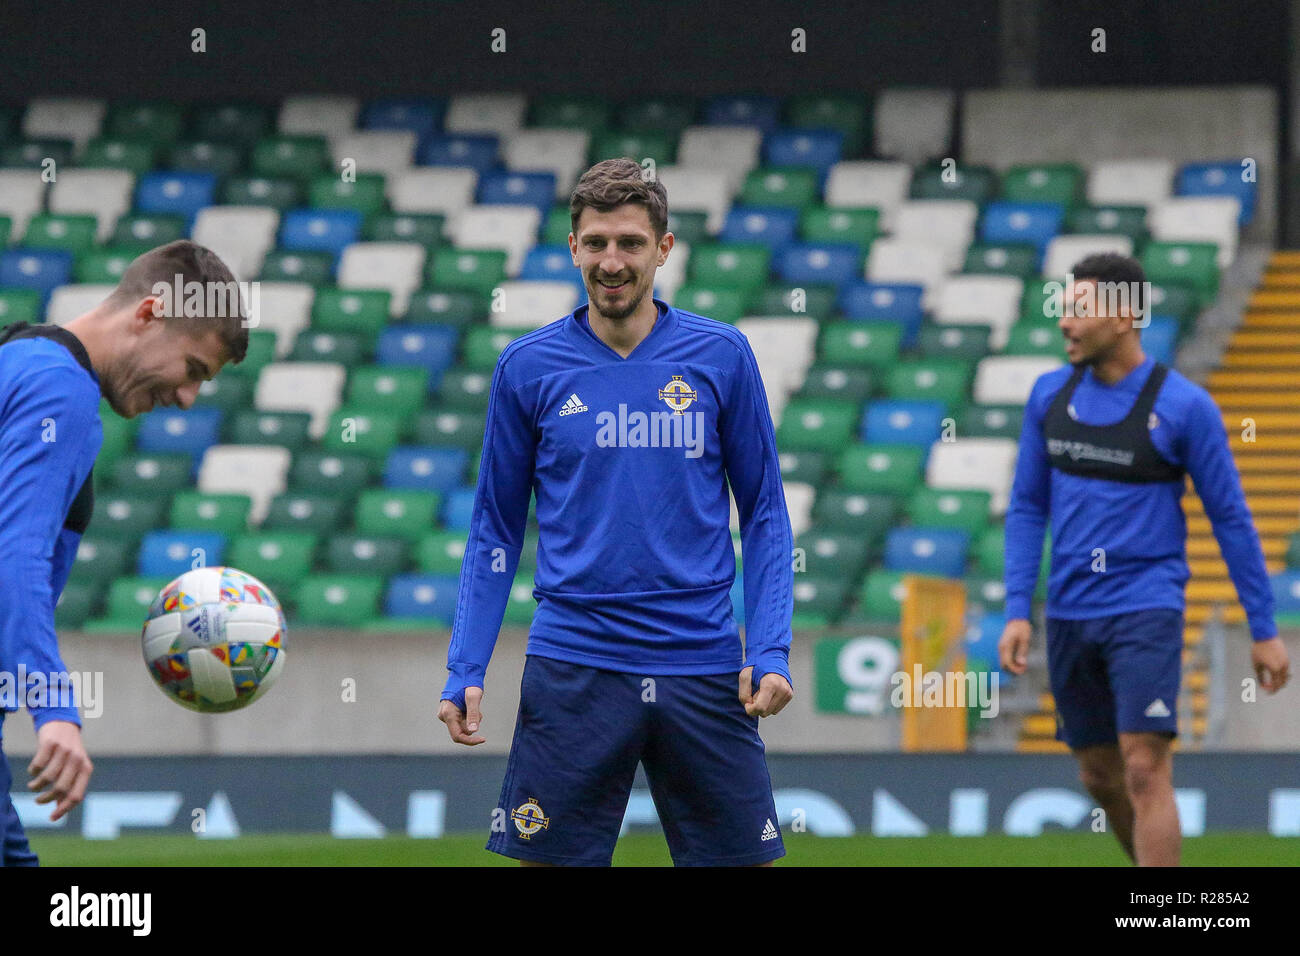 Windsor Park, Belfast, Northern Ireland.17 November 2018. Northern Ireland training in Belfast this morning ahead of their UEFA Nations League game against Austria tomorrow night in the stadium. Craig Cathcart (centre) with Paddy McNair (left). Credit: David Hunter/Alamy Live News. Stock Photo